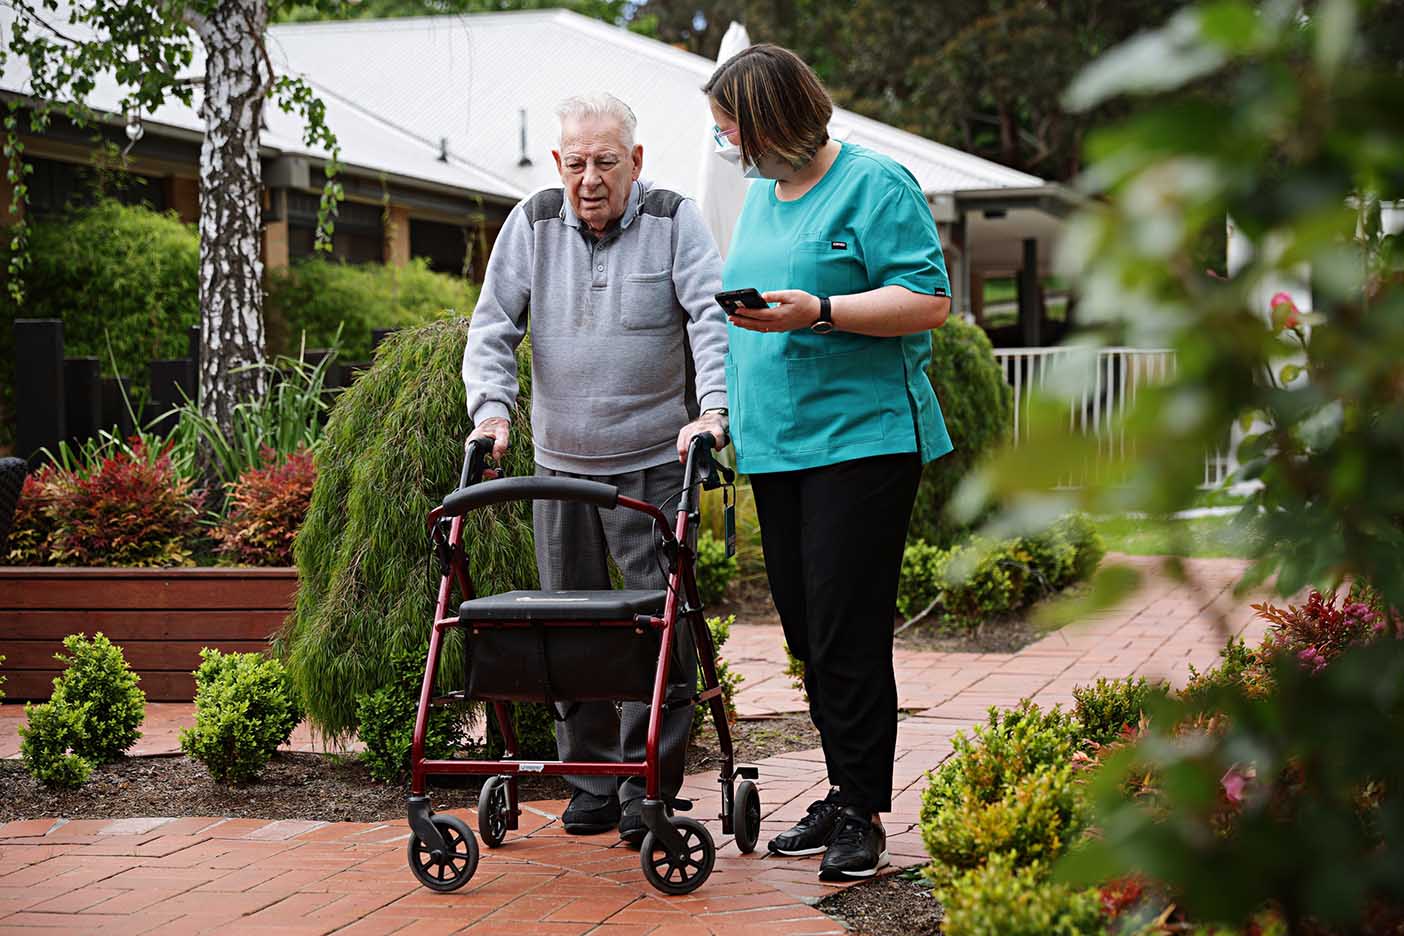 The tool helps aged care staff plan care around frailty and risk of falls for each resident.